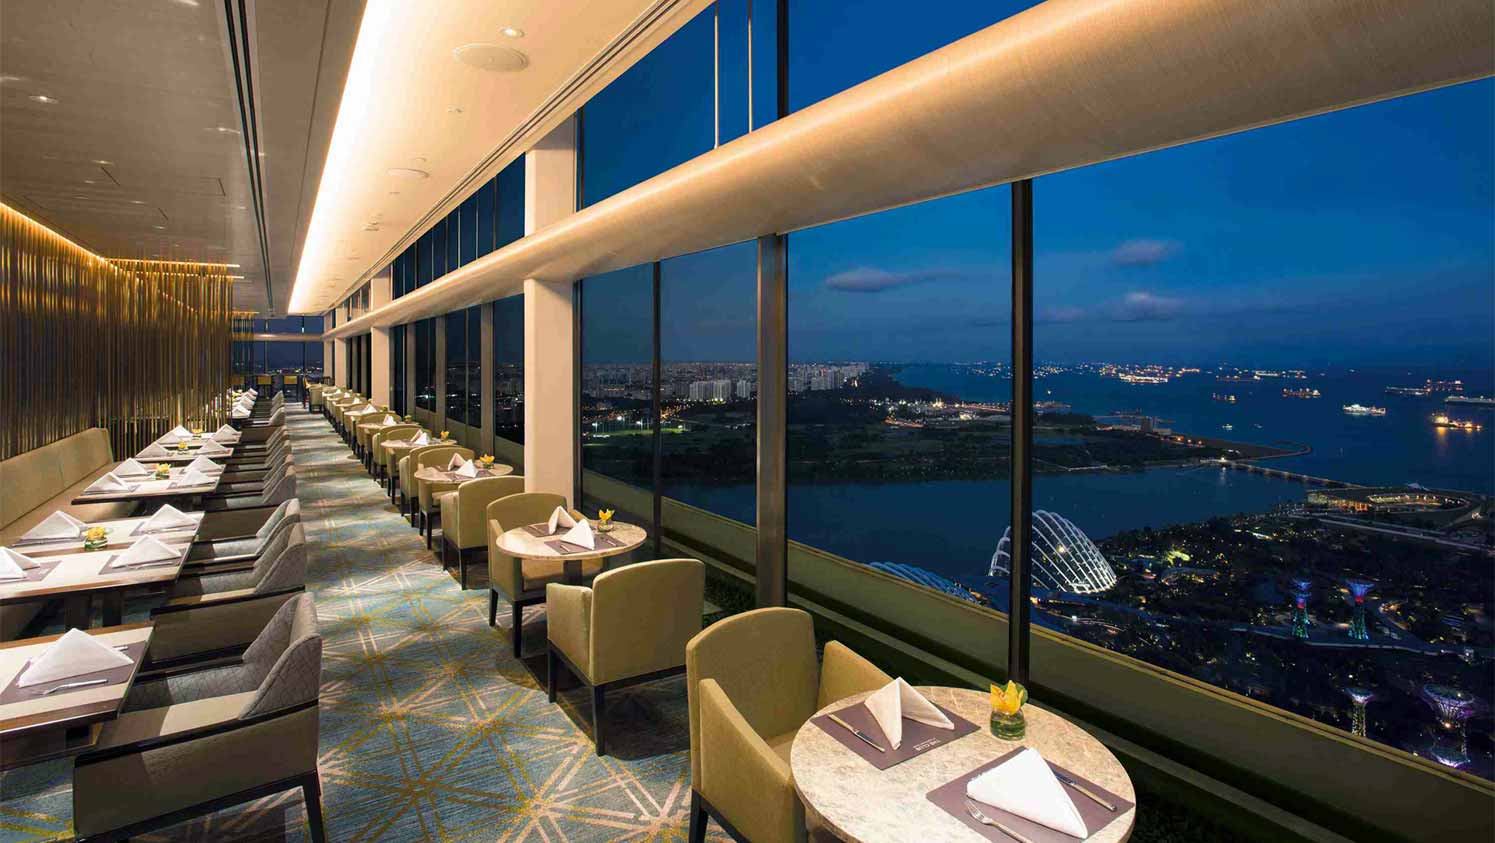 Club55 | Restaurant and Bar in Singapore | Marina Bay Sands